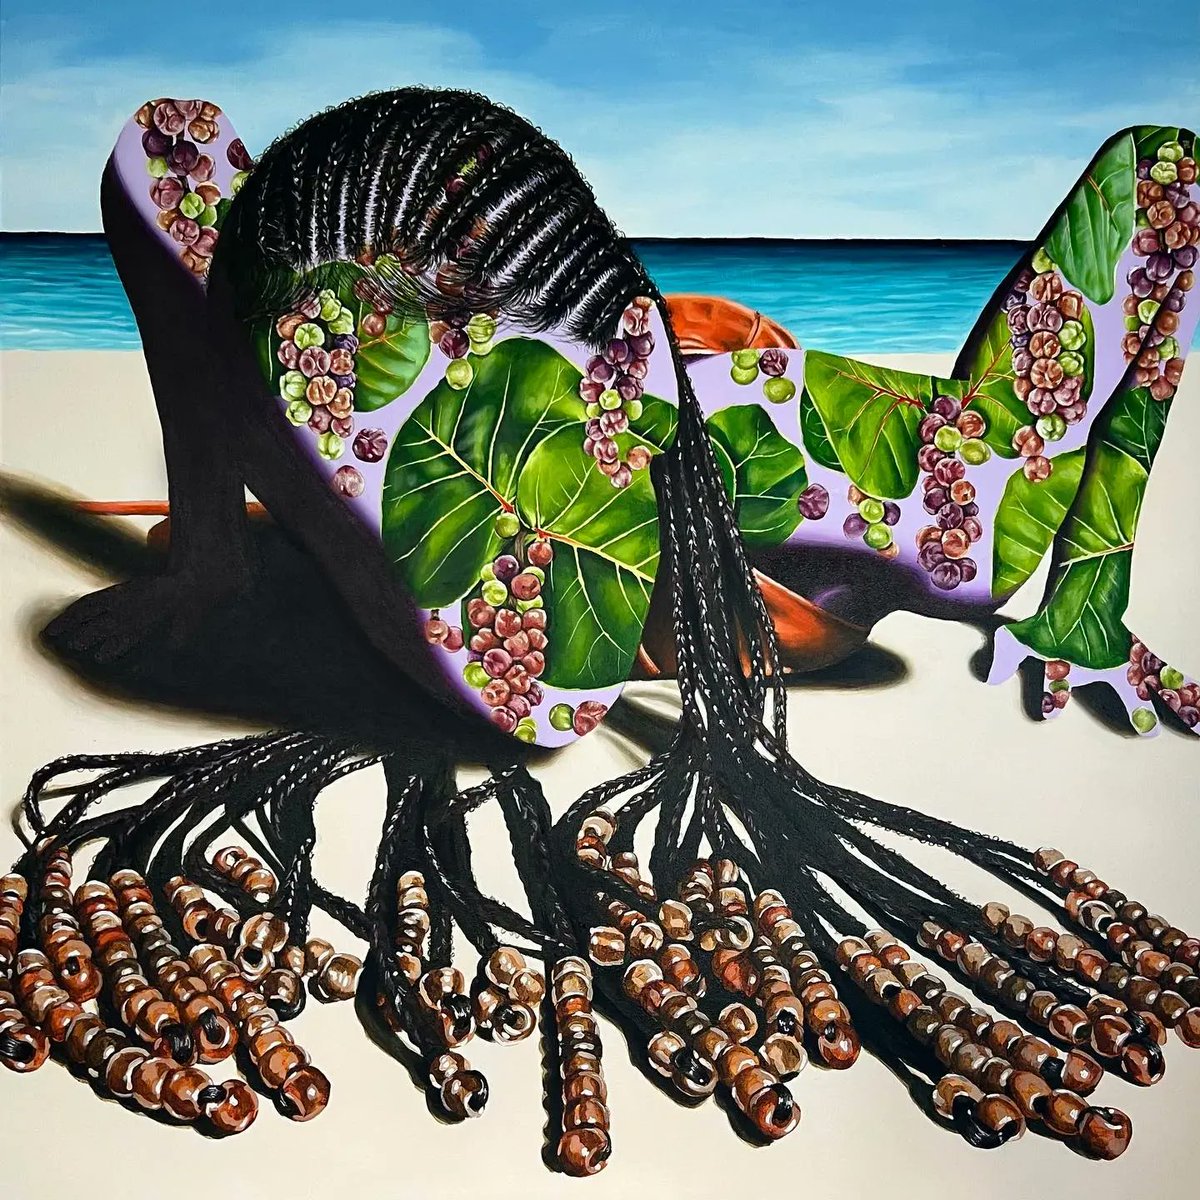 We love this!! “Grounded” by Akilah Watts, 36 in. x 36 in, Acrylic on Canvas, 2022.

#beautifulbizarre #akilahwatts #painting #acrylic #acrylicpainting #woodenbeads #blackwoman #seagrapes